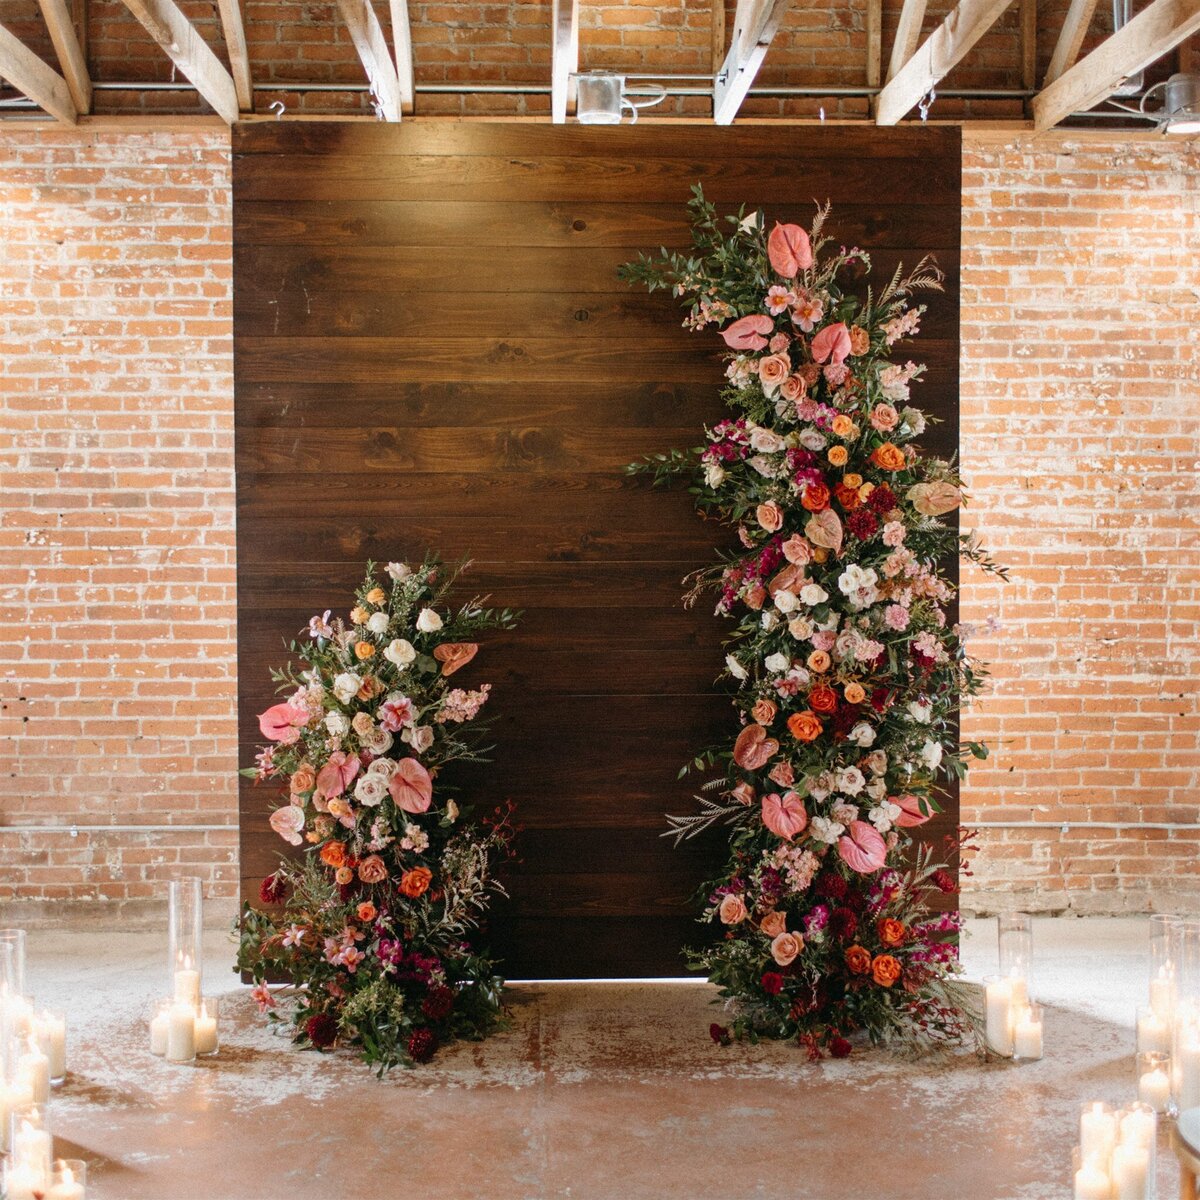 Dark walnut ceremony backdrop with colorful florals for spring wedding at The St Vrain, Longmont CO.